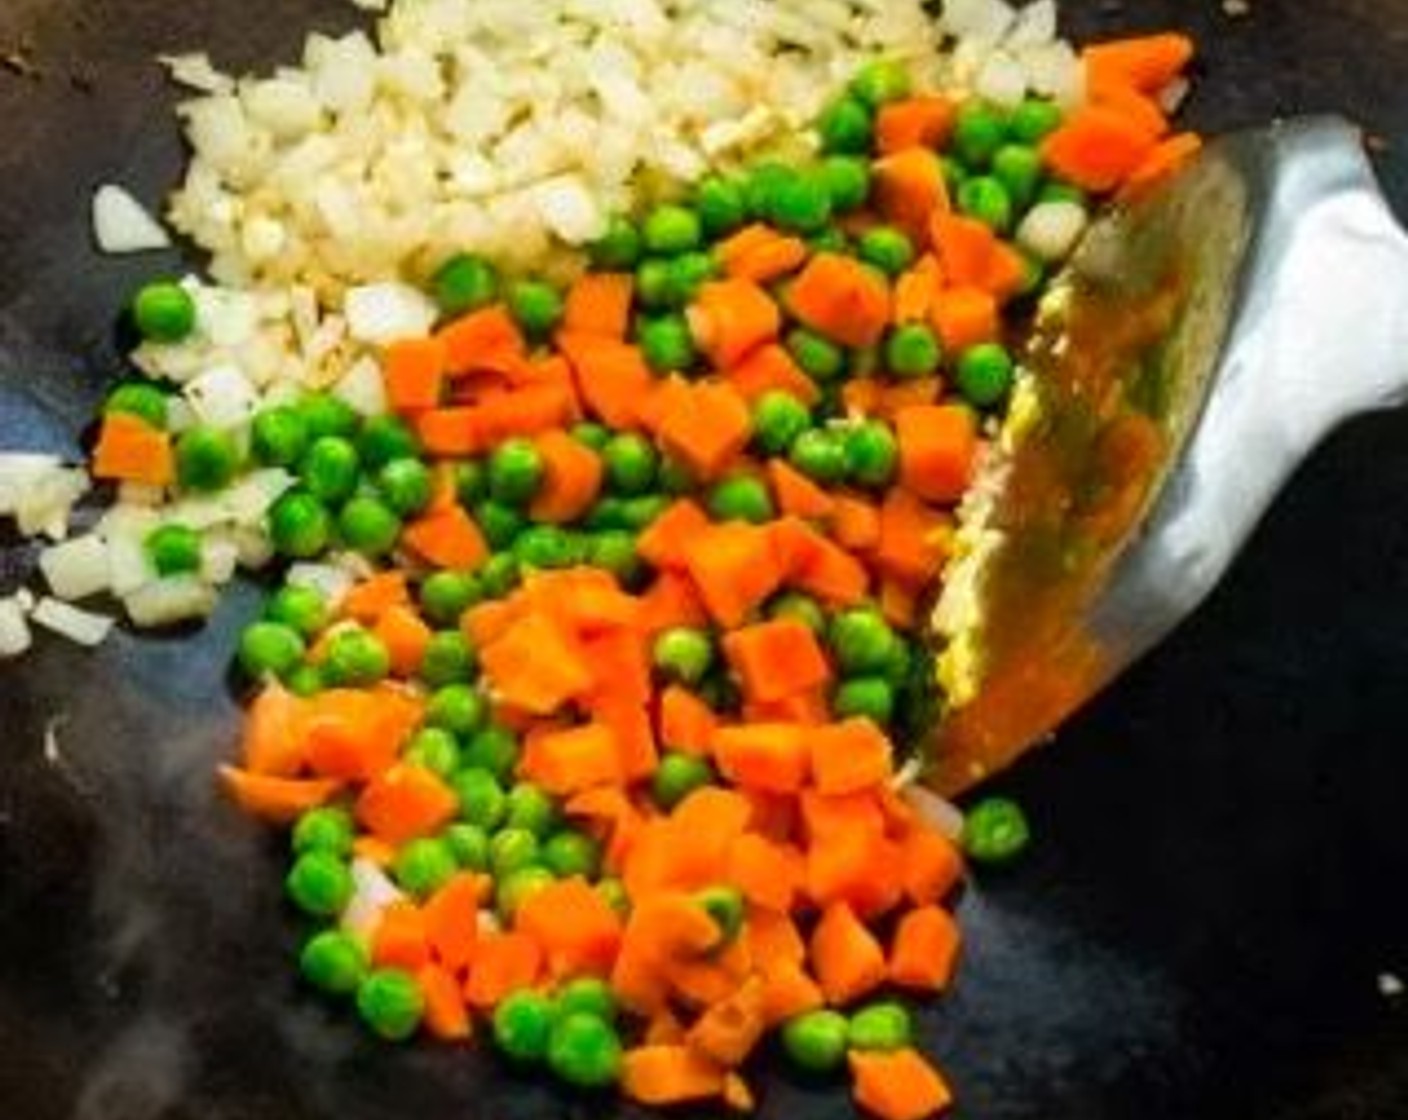 step 4 Add the Frozen Peas and Carrots (1 cup) to the wok. Stir-fry for about 30 seconds.